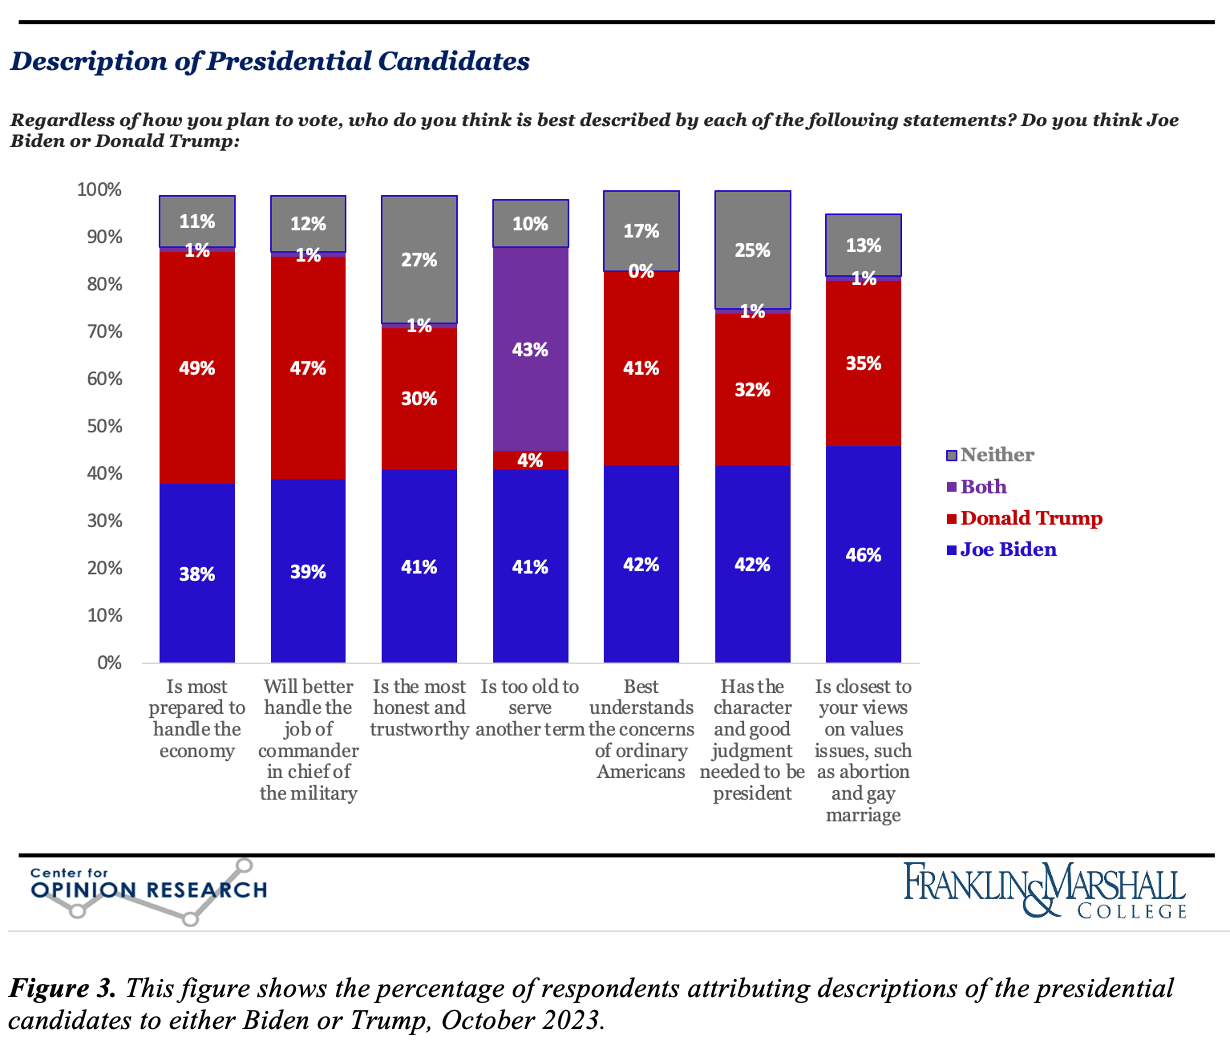 Figure 3. Bar graph of October 2023 F&M Poll data showing Pennsylvania voters' views on Biden and Trump's values, strengths, and characteristics. Which candidate is better prepared to handle the economy and the job of commander in chief, best understands ordinary Americans, is closer to their views on values issues, is the most honest, and has the character and good judgement to serve another term? Are either or both too old to serve again?